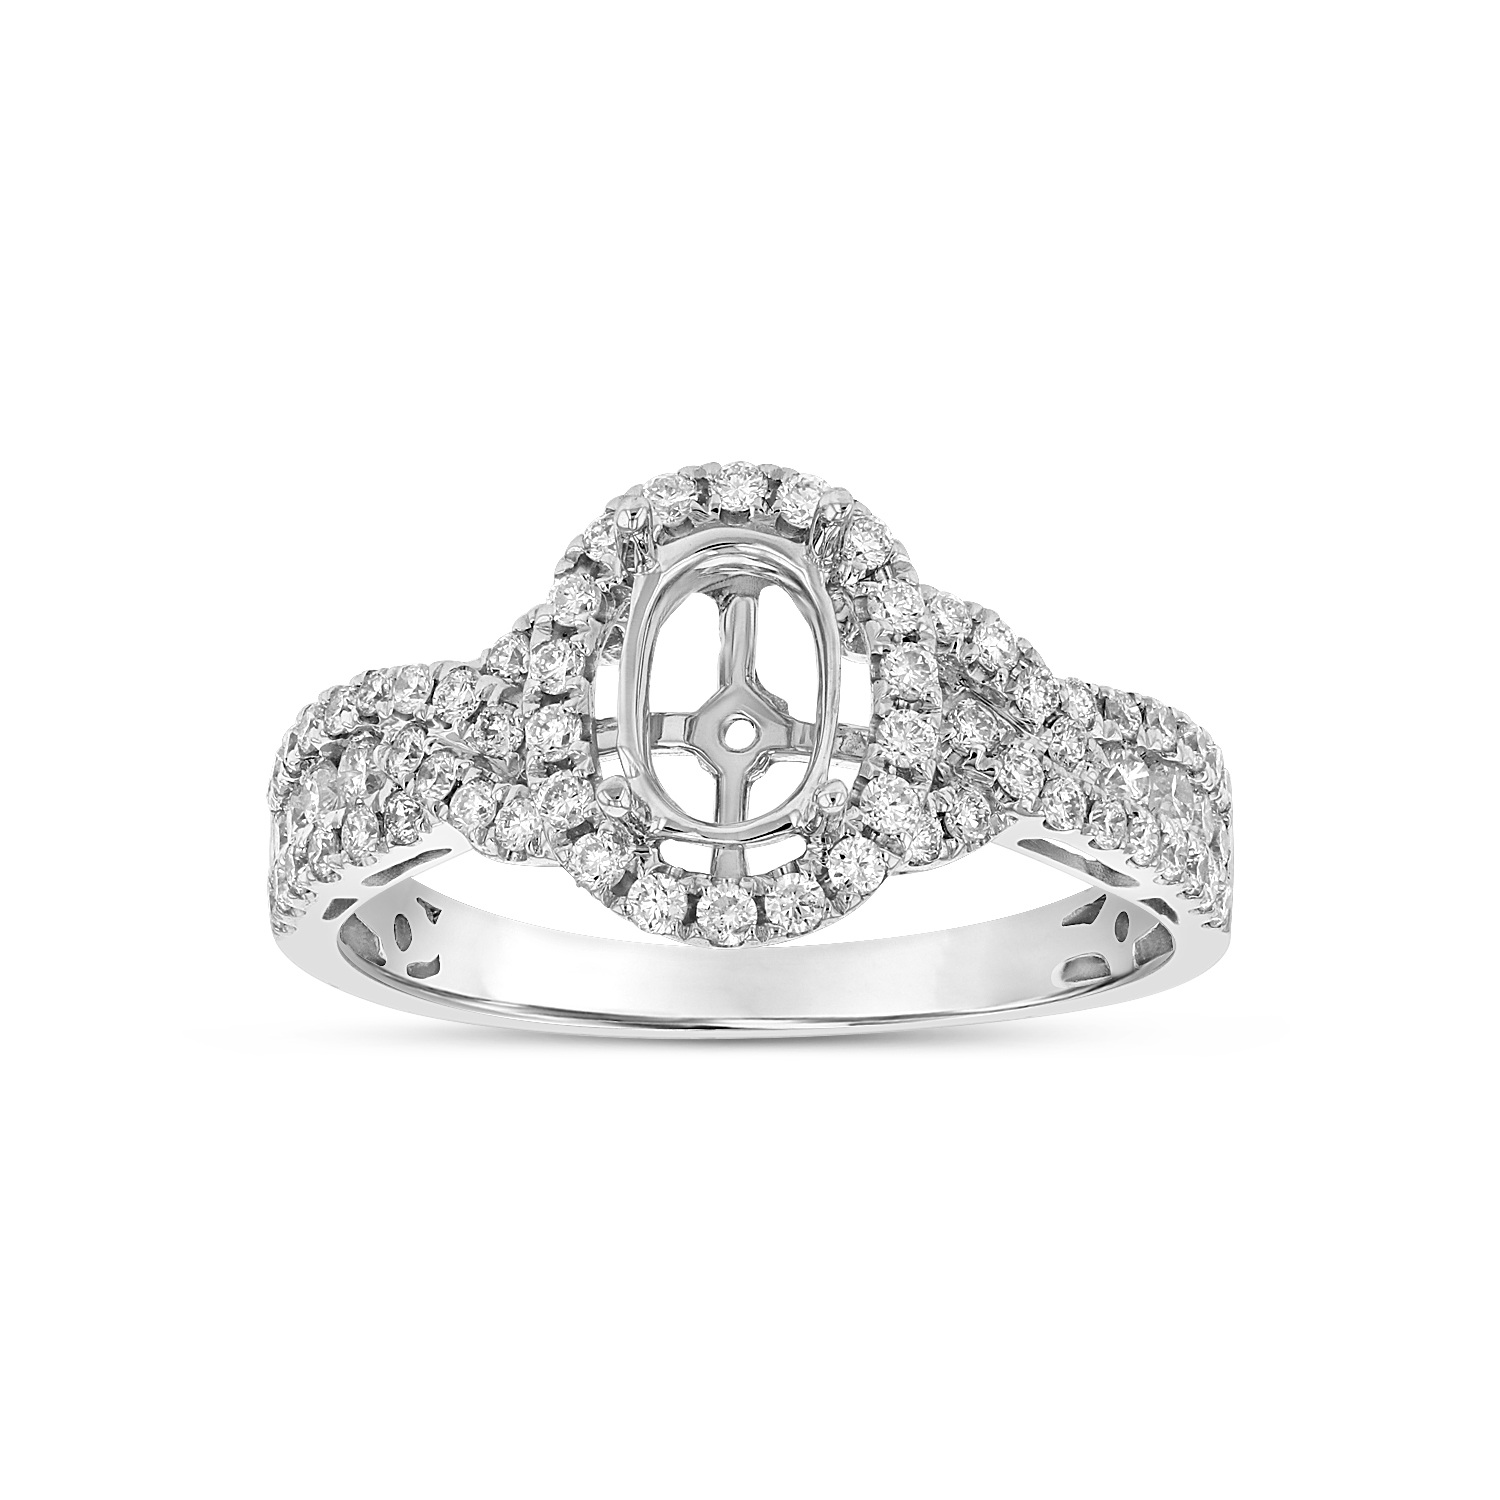 View 0.54ctw Diamond Semi Mount Engagement Ring in 18k White Gold